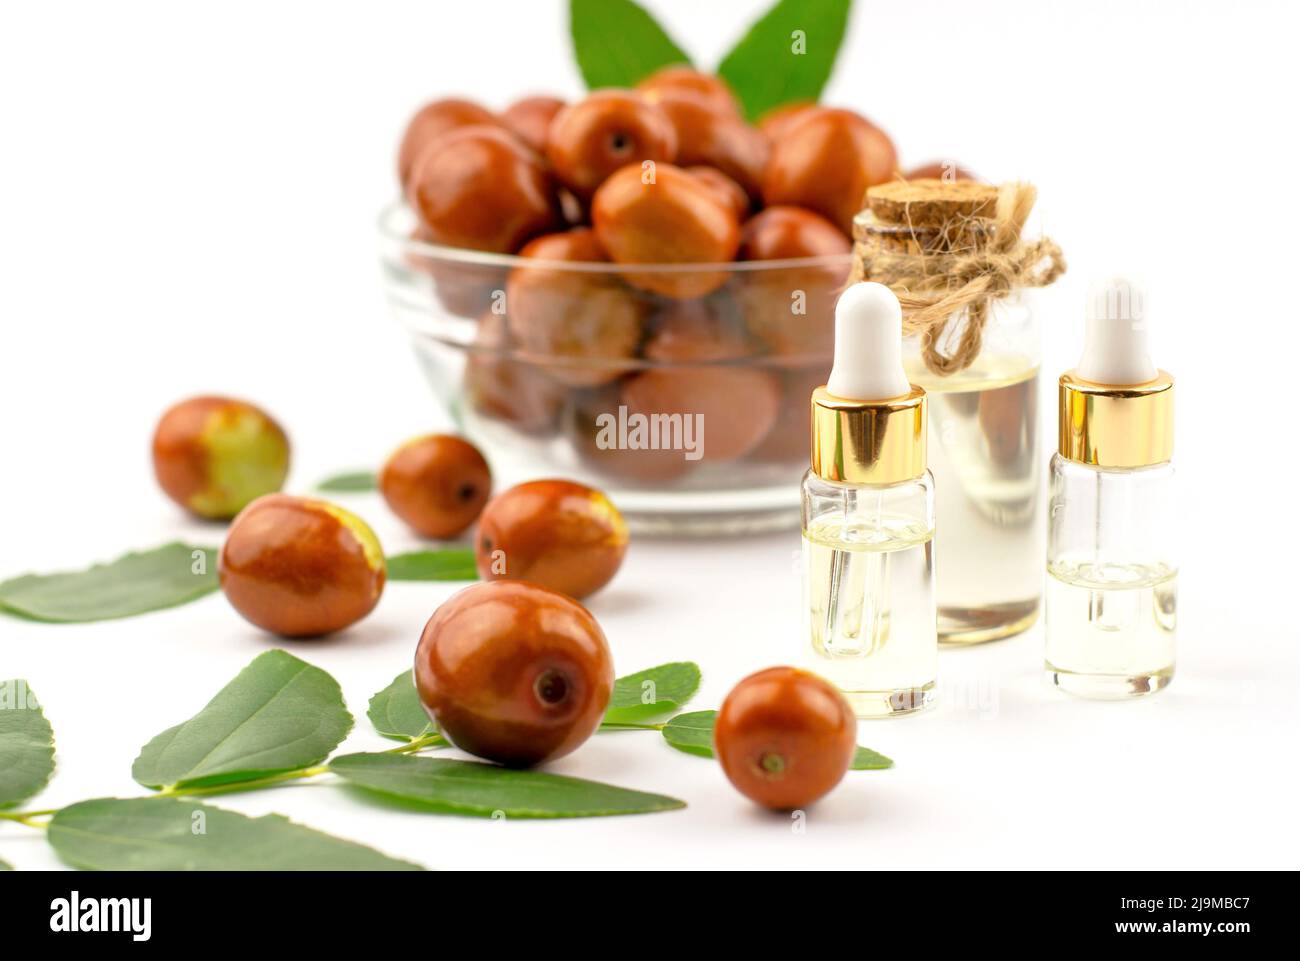 Jojoba oil in a bottle with a dropper and fresh jujube fruit Stock Photo